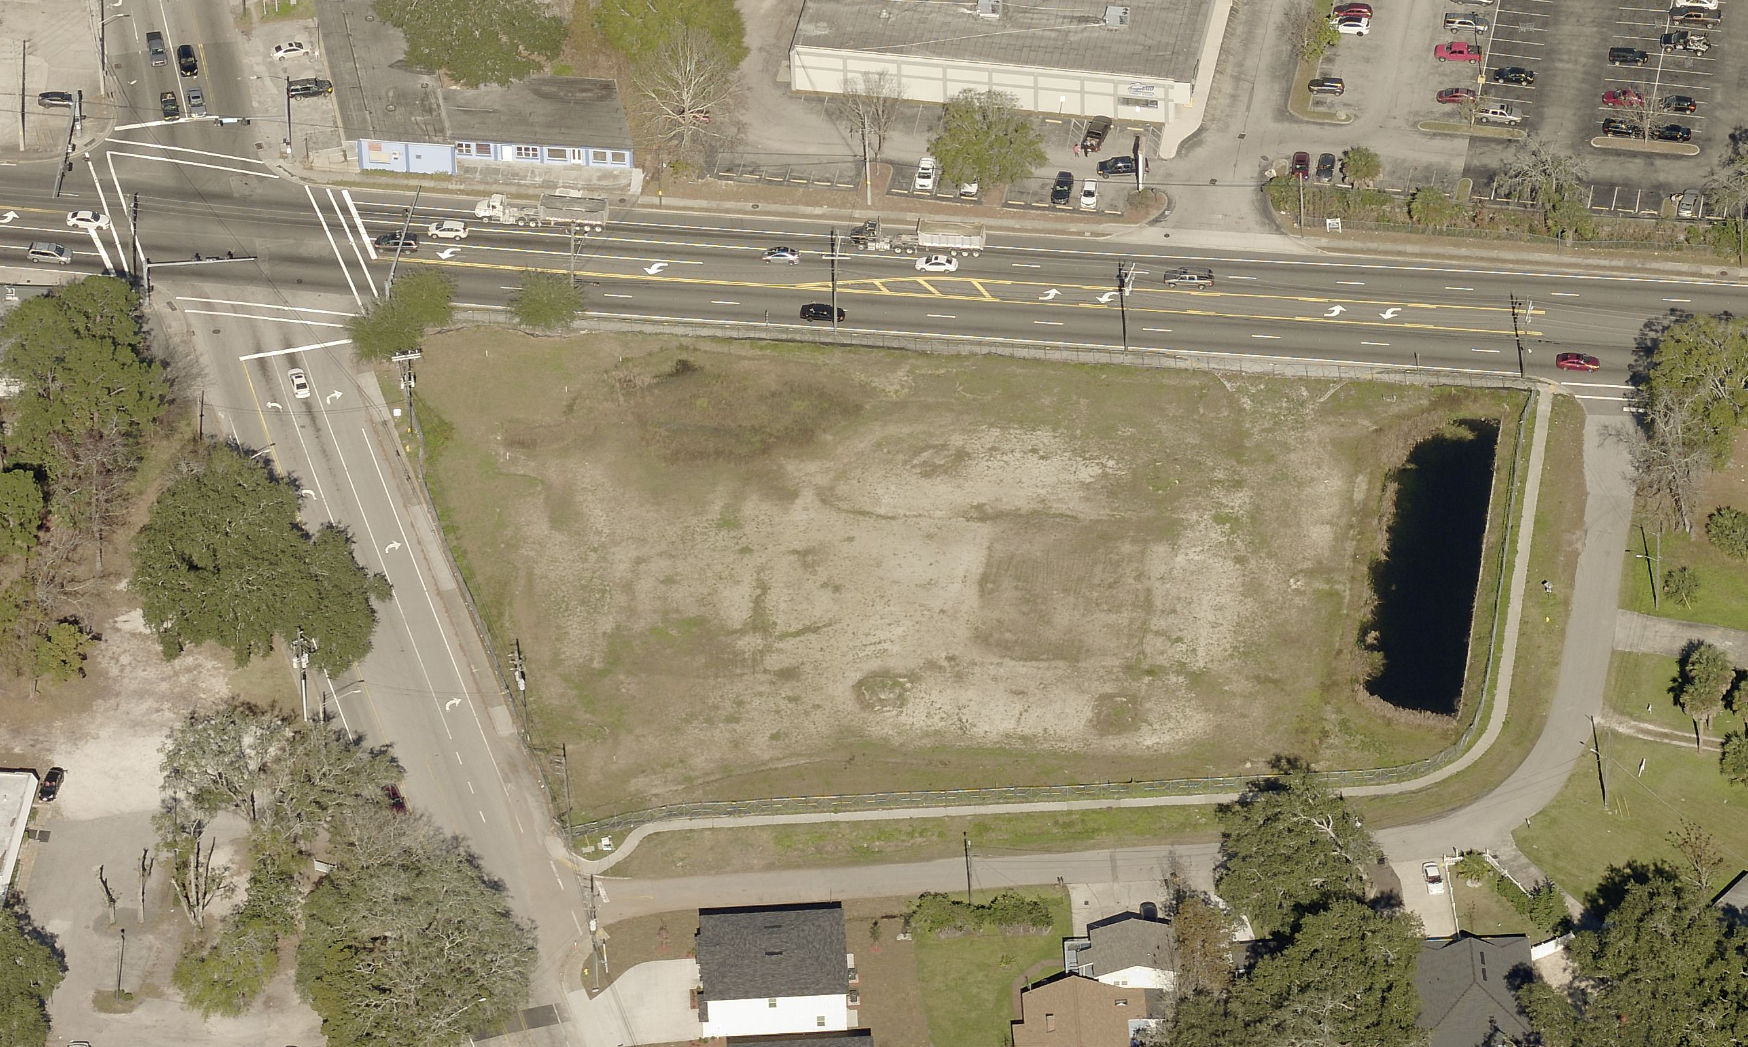 The Wawa site sits east of Spring Park Road and south of Emerson on what is now a vacant lot.